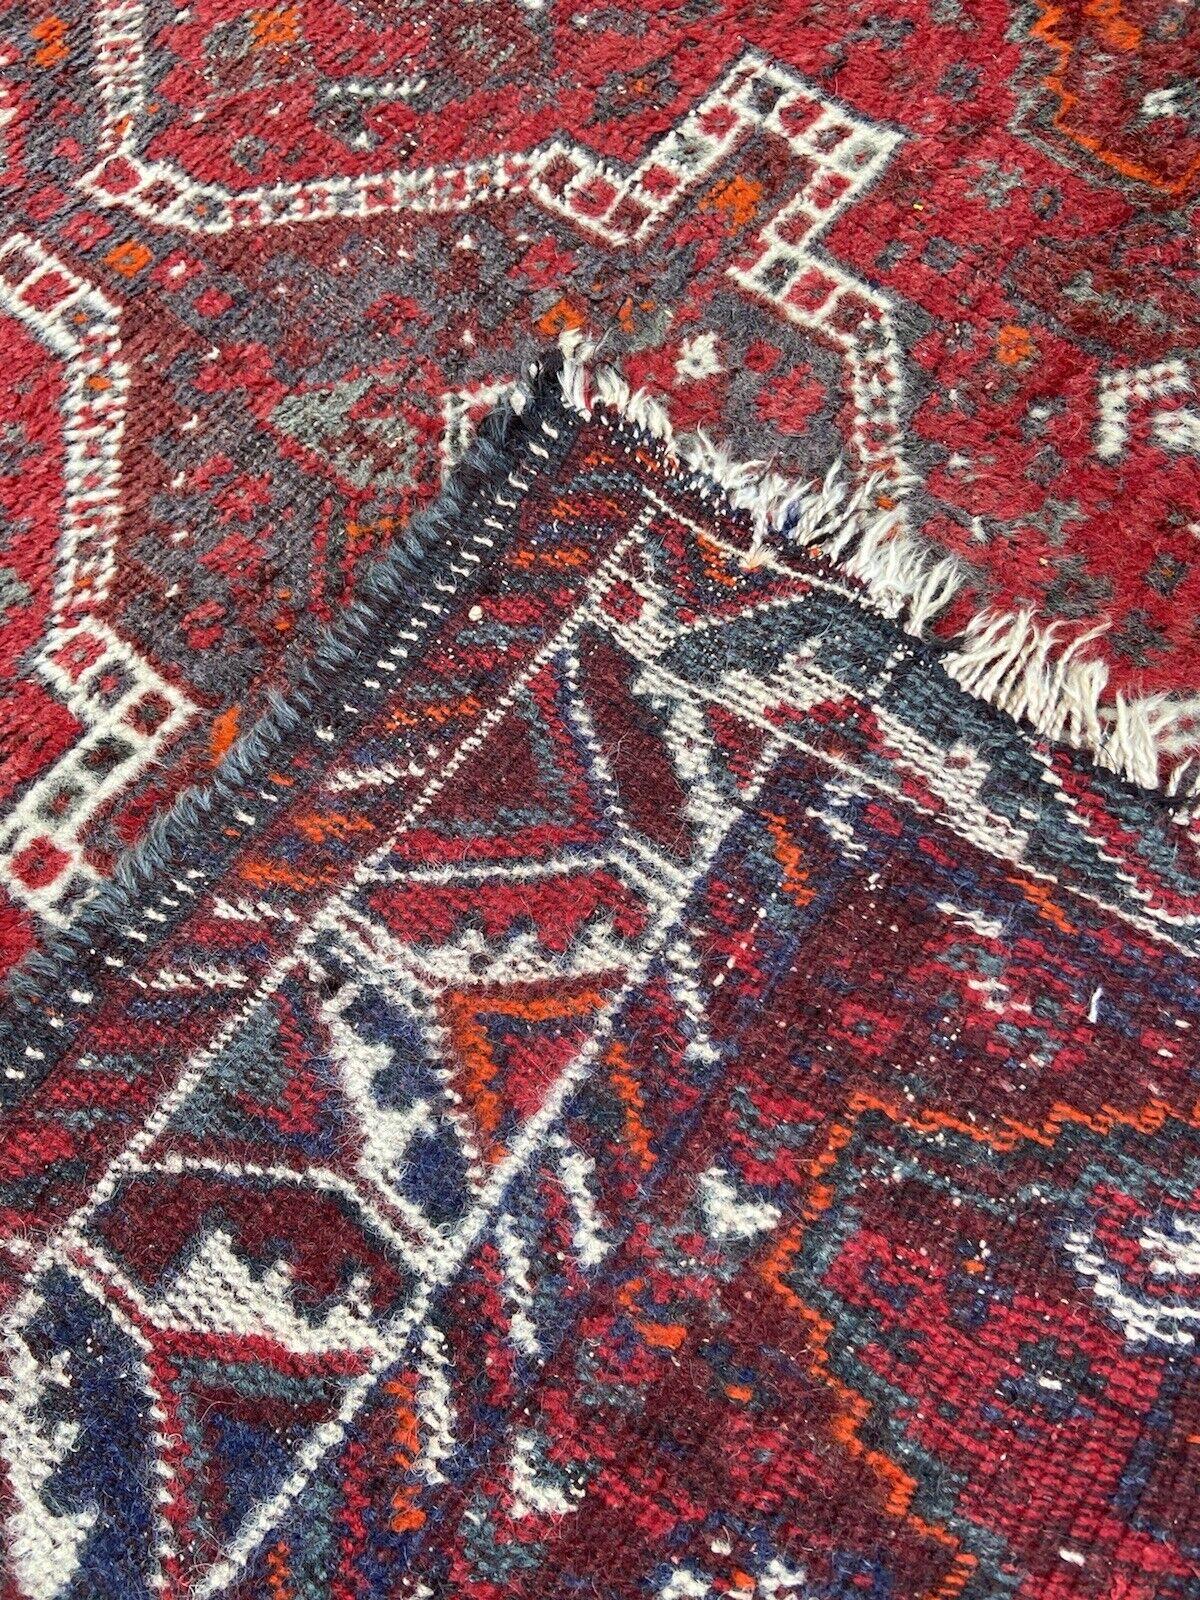 Mid-20th Century Handmade Vintage Persian Style Shiraz Rug 3.9' x 5, 1940s - 1S02 For Sale